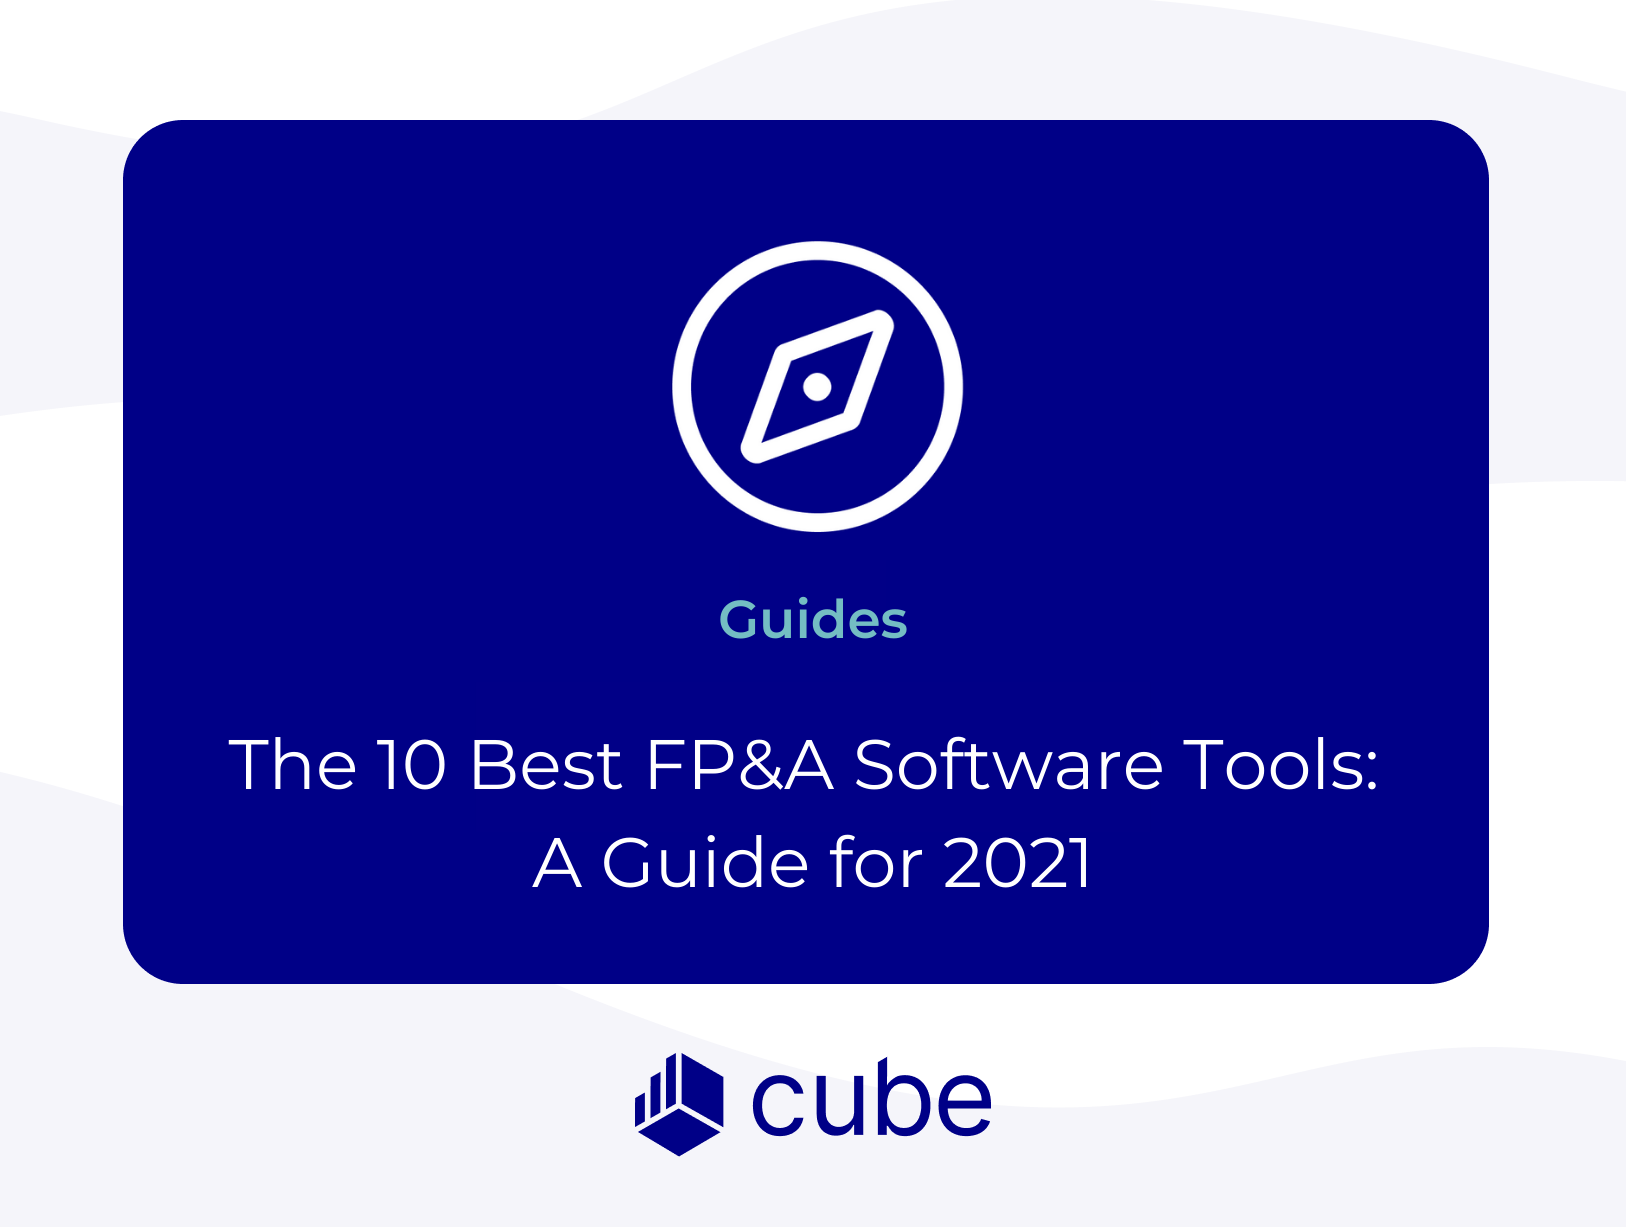 The 10 Best FP&A Software Tools: A Guide for 2022